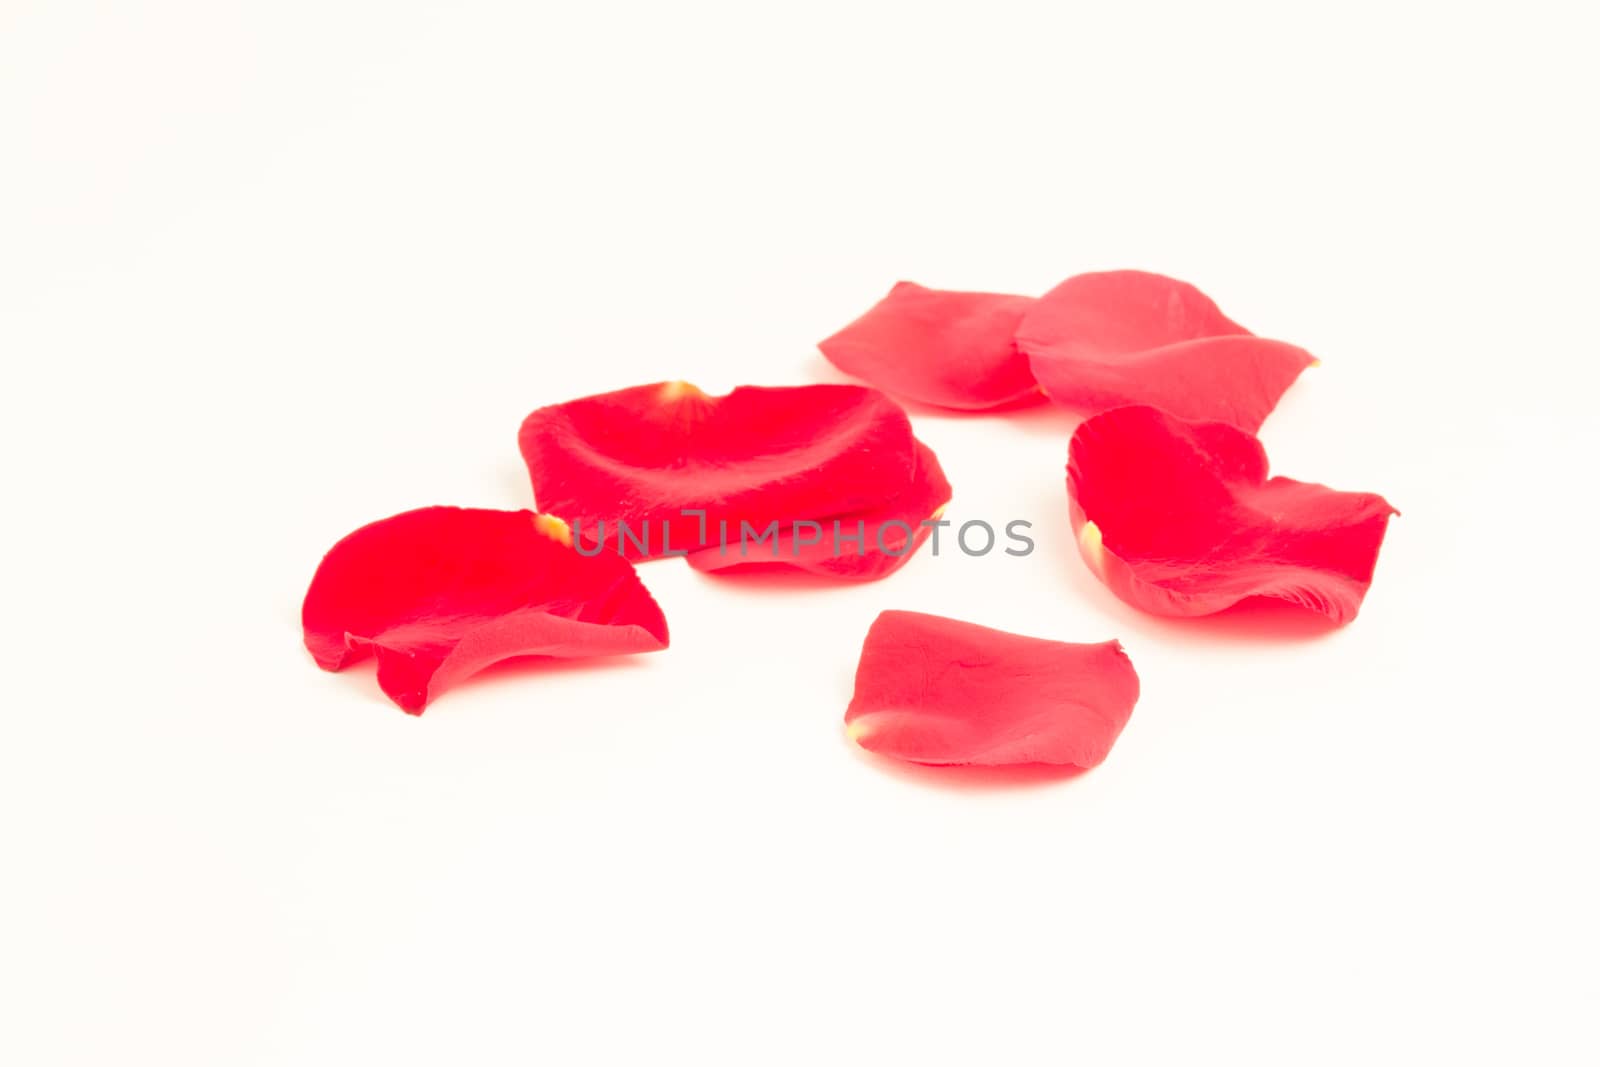 Scattered rose petals on white background